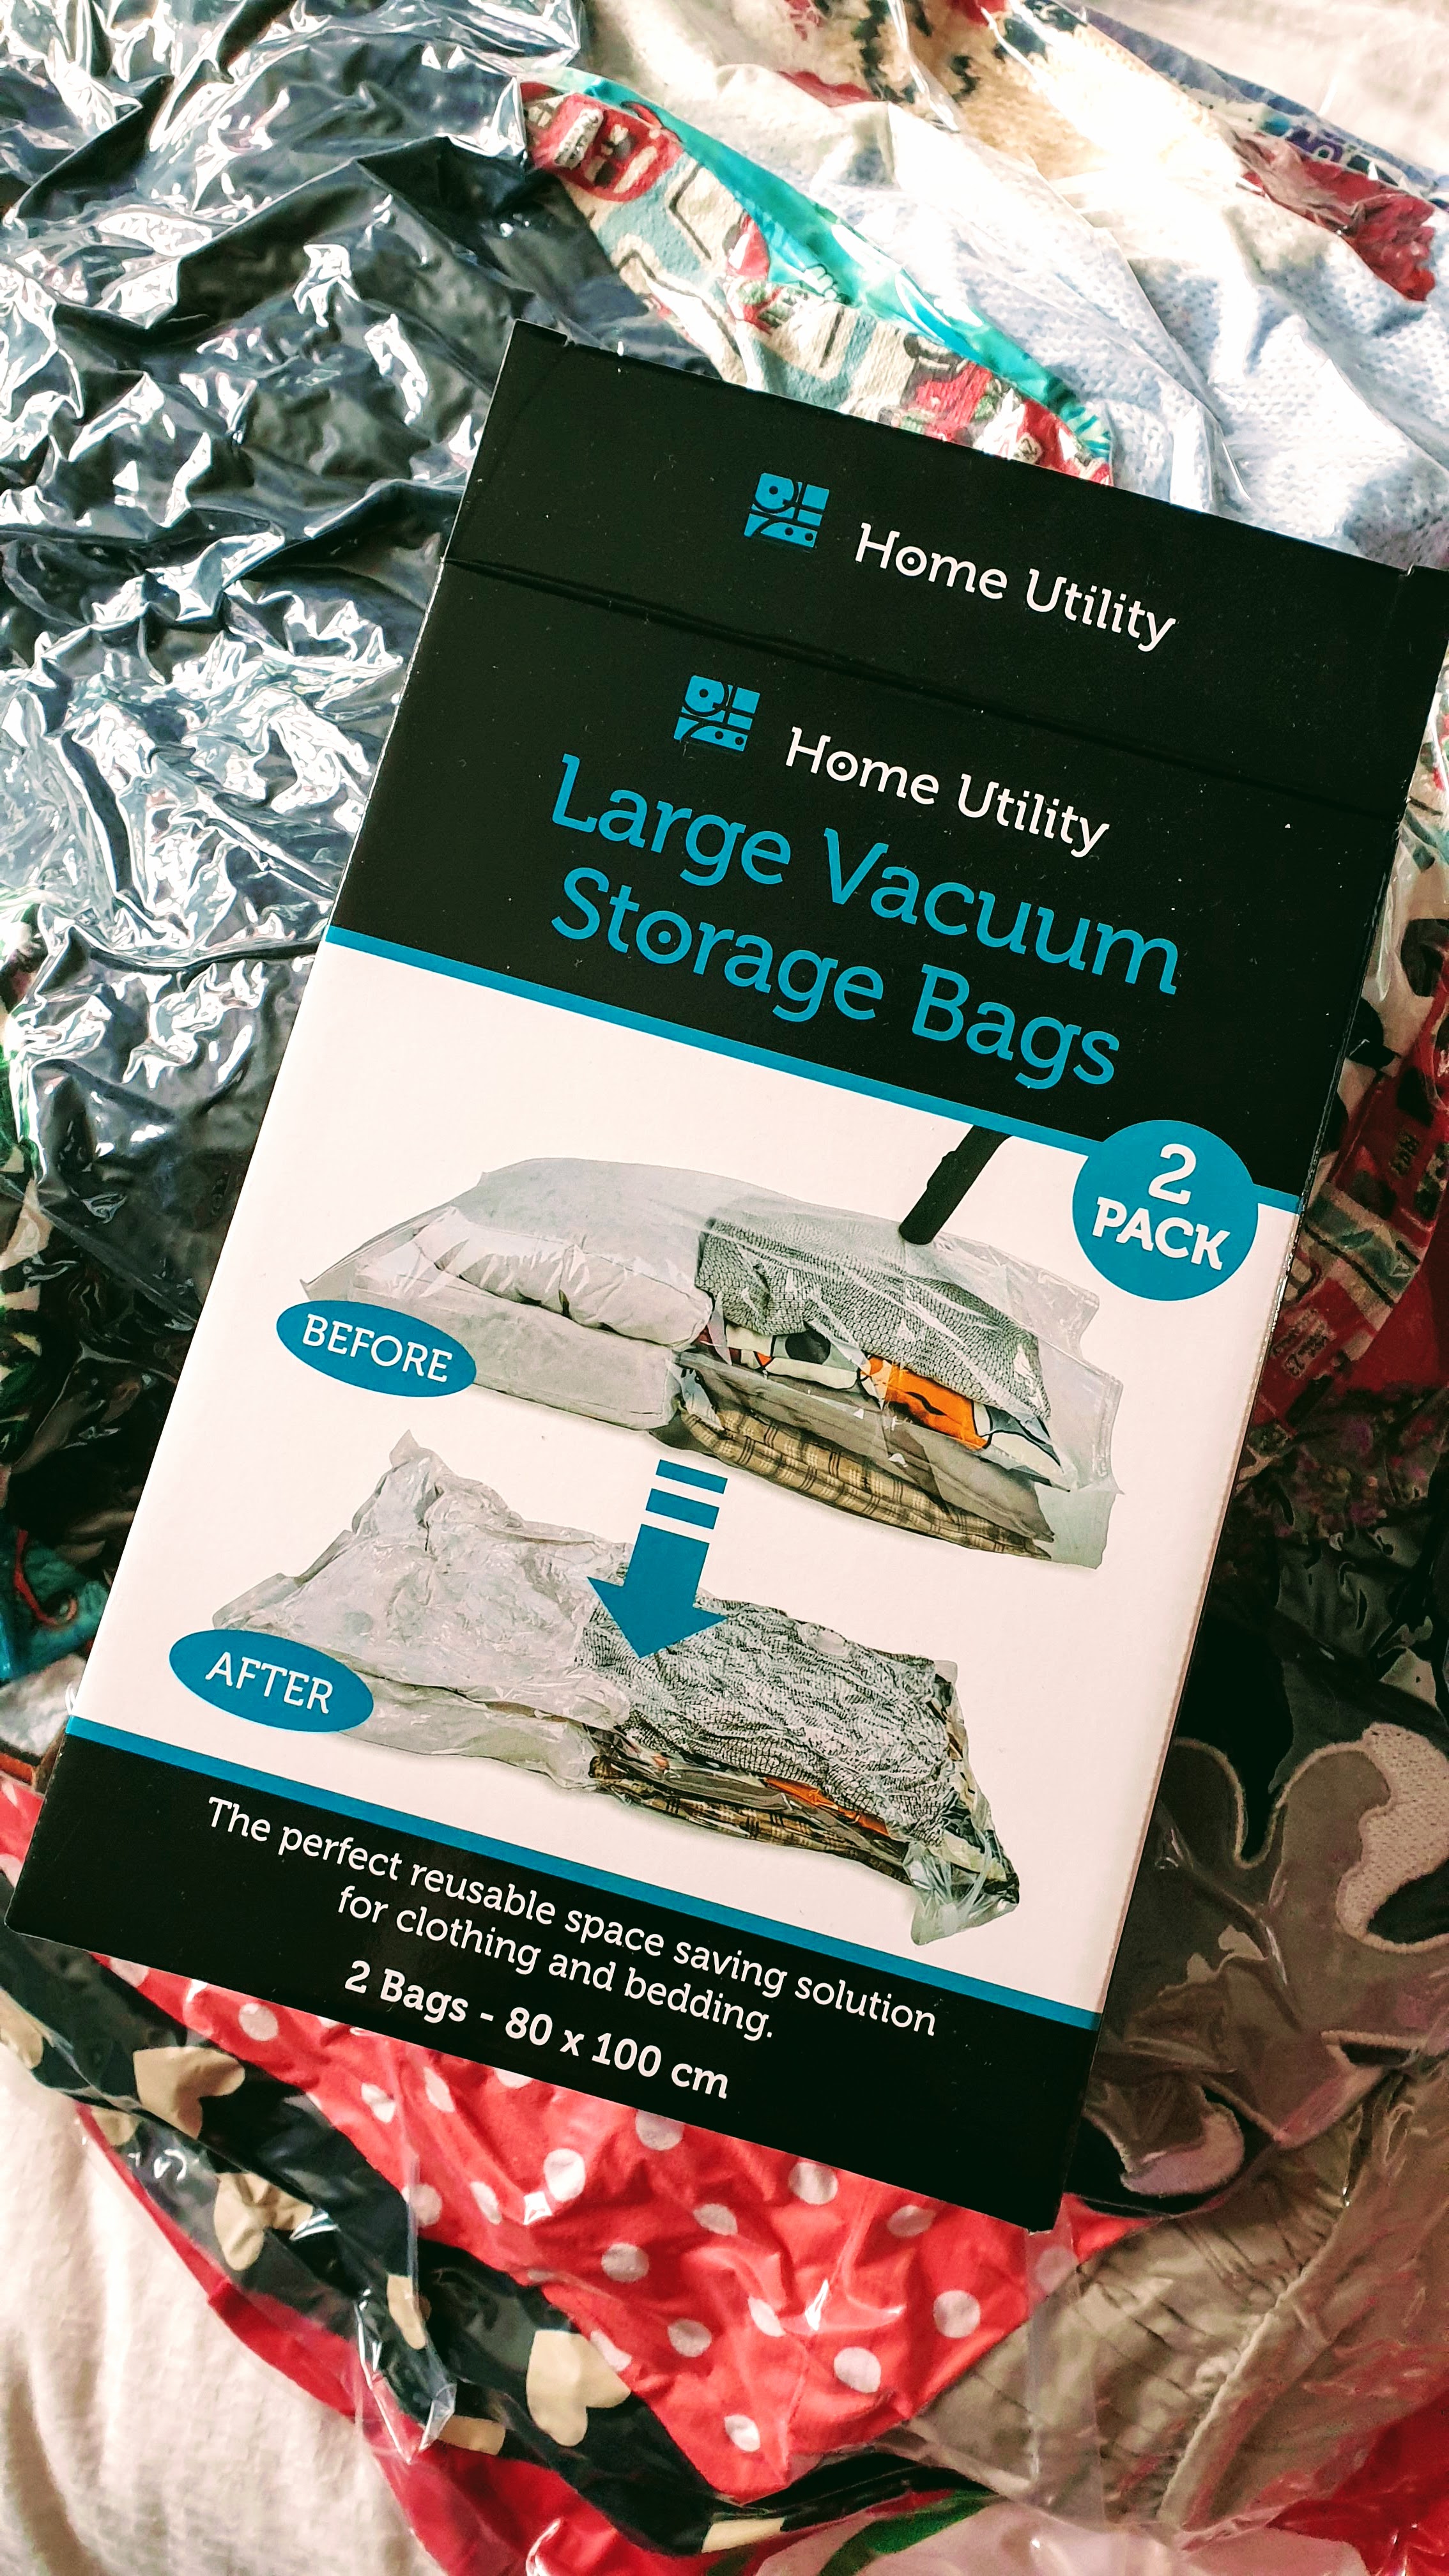 Vacuum Storage Bag For Home Use - A Space Saving Solution For